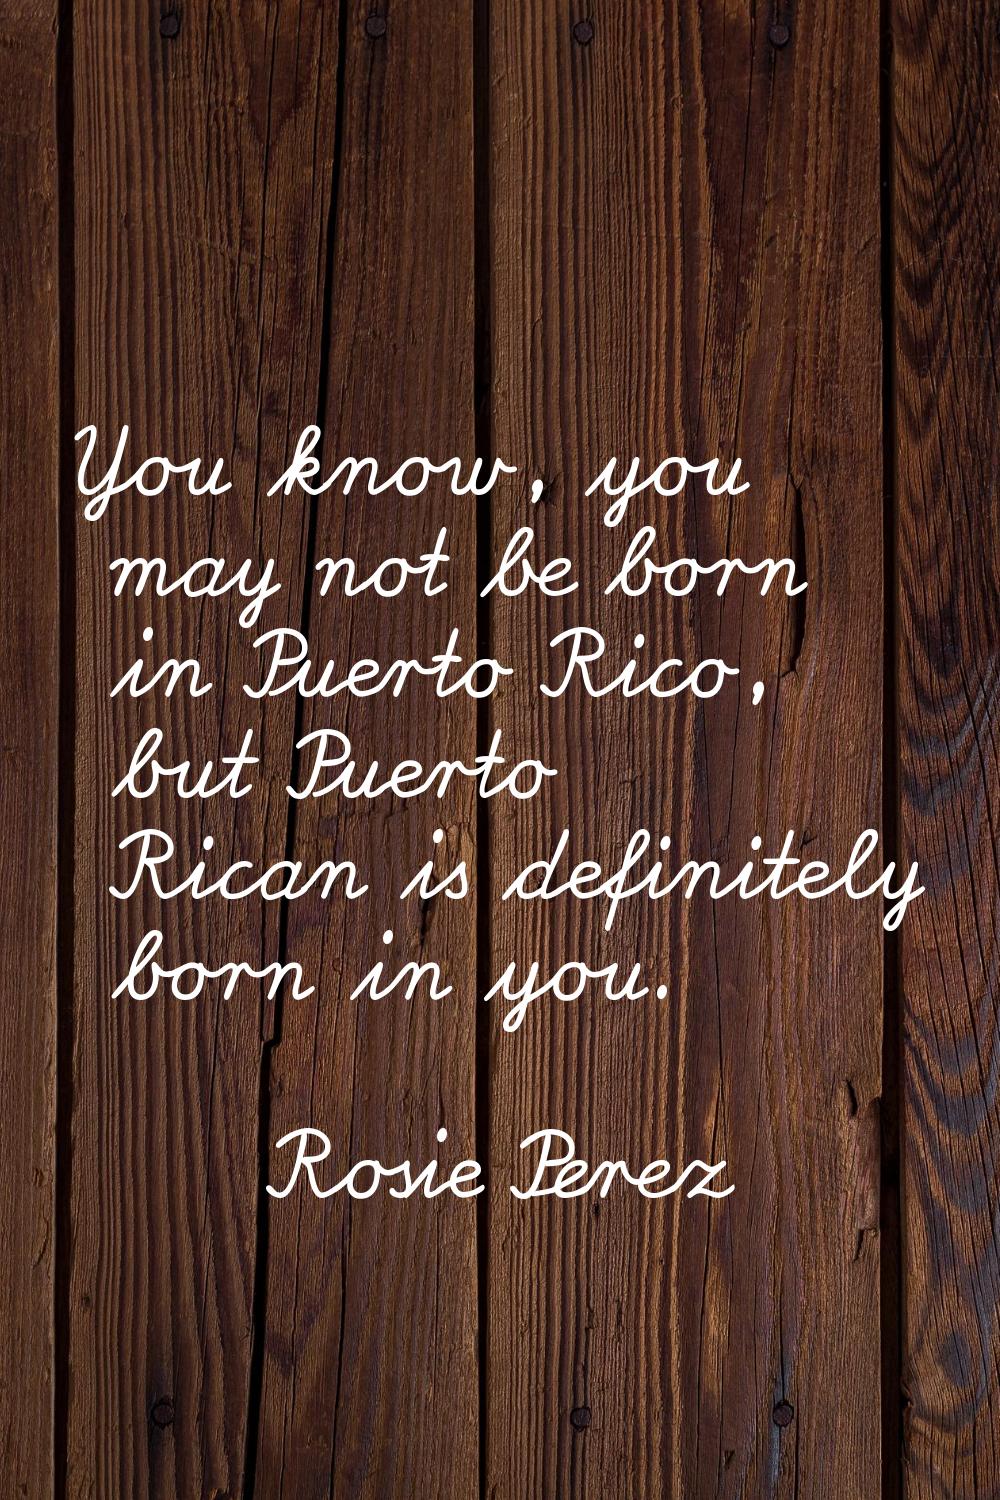 You know, you may not be born in Puerto Rico, but Puerto Rican is definitely born in you.